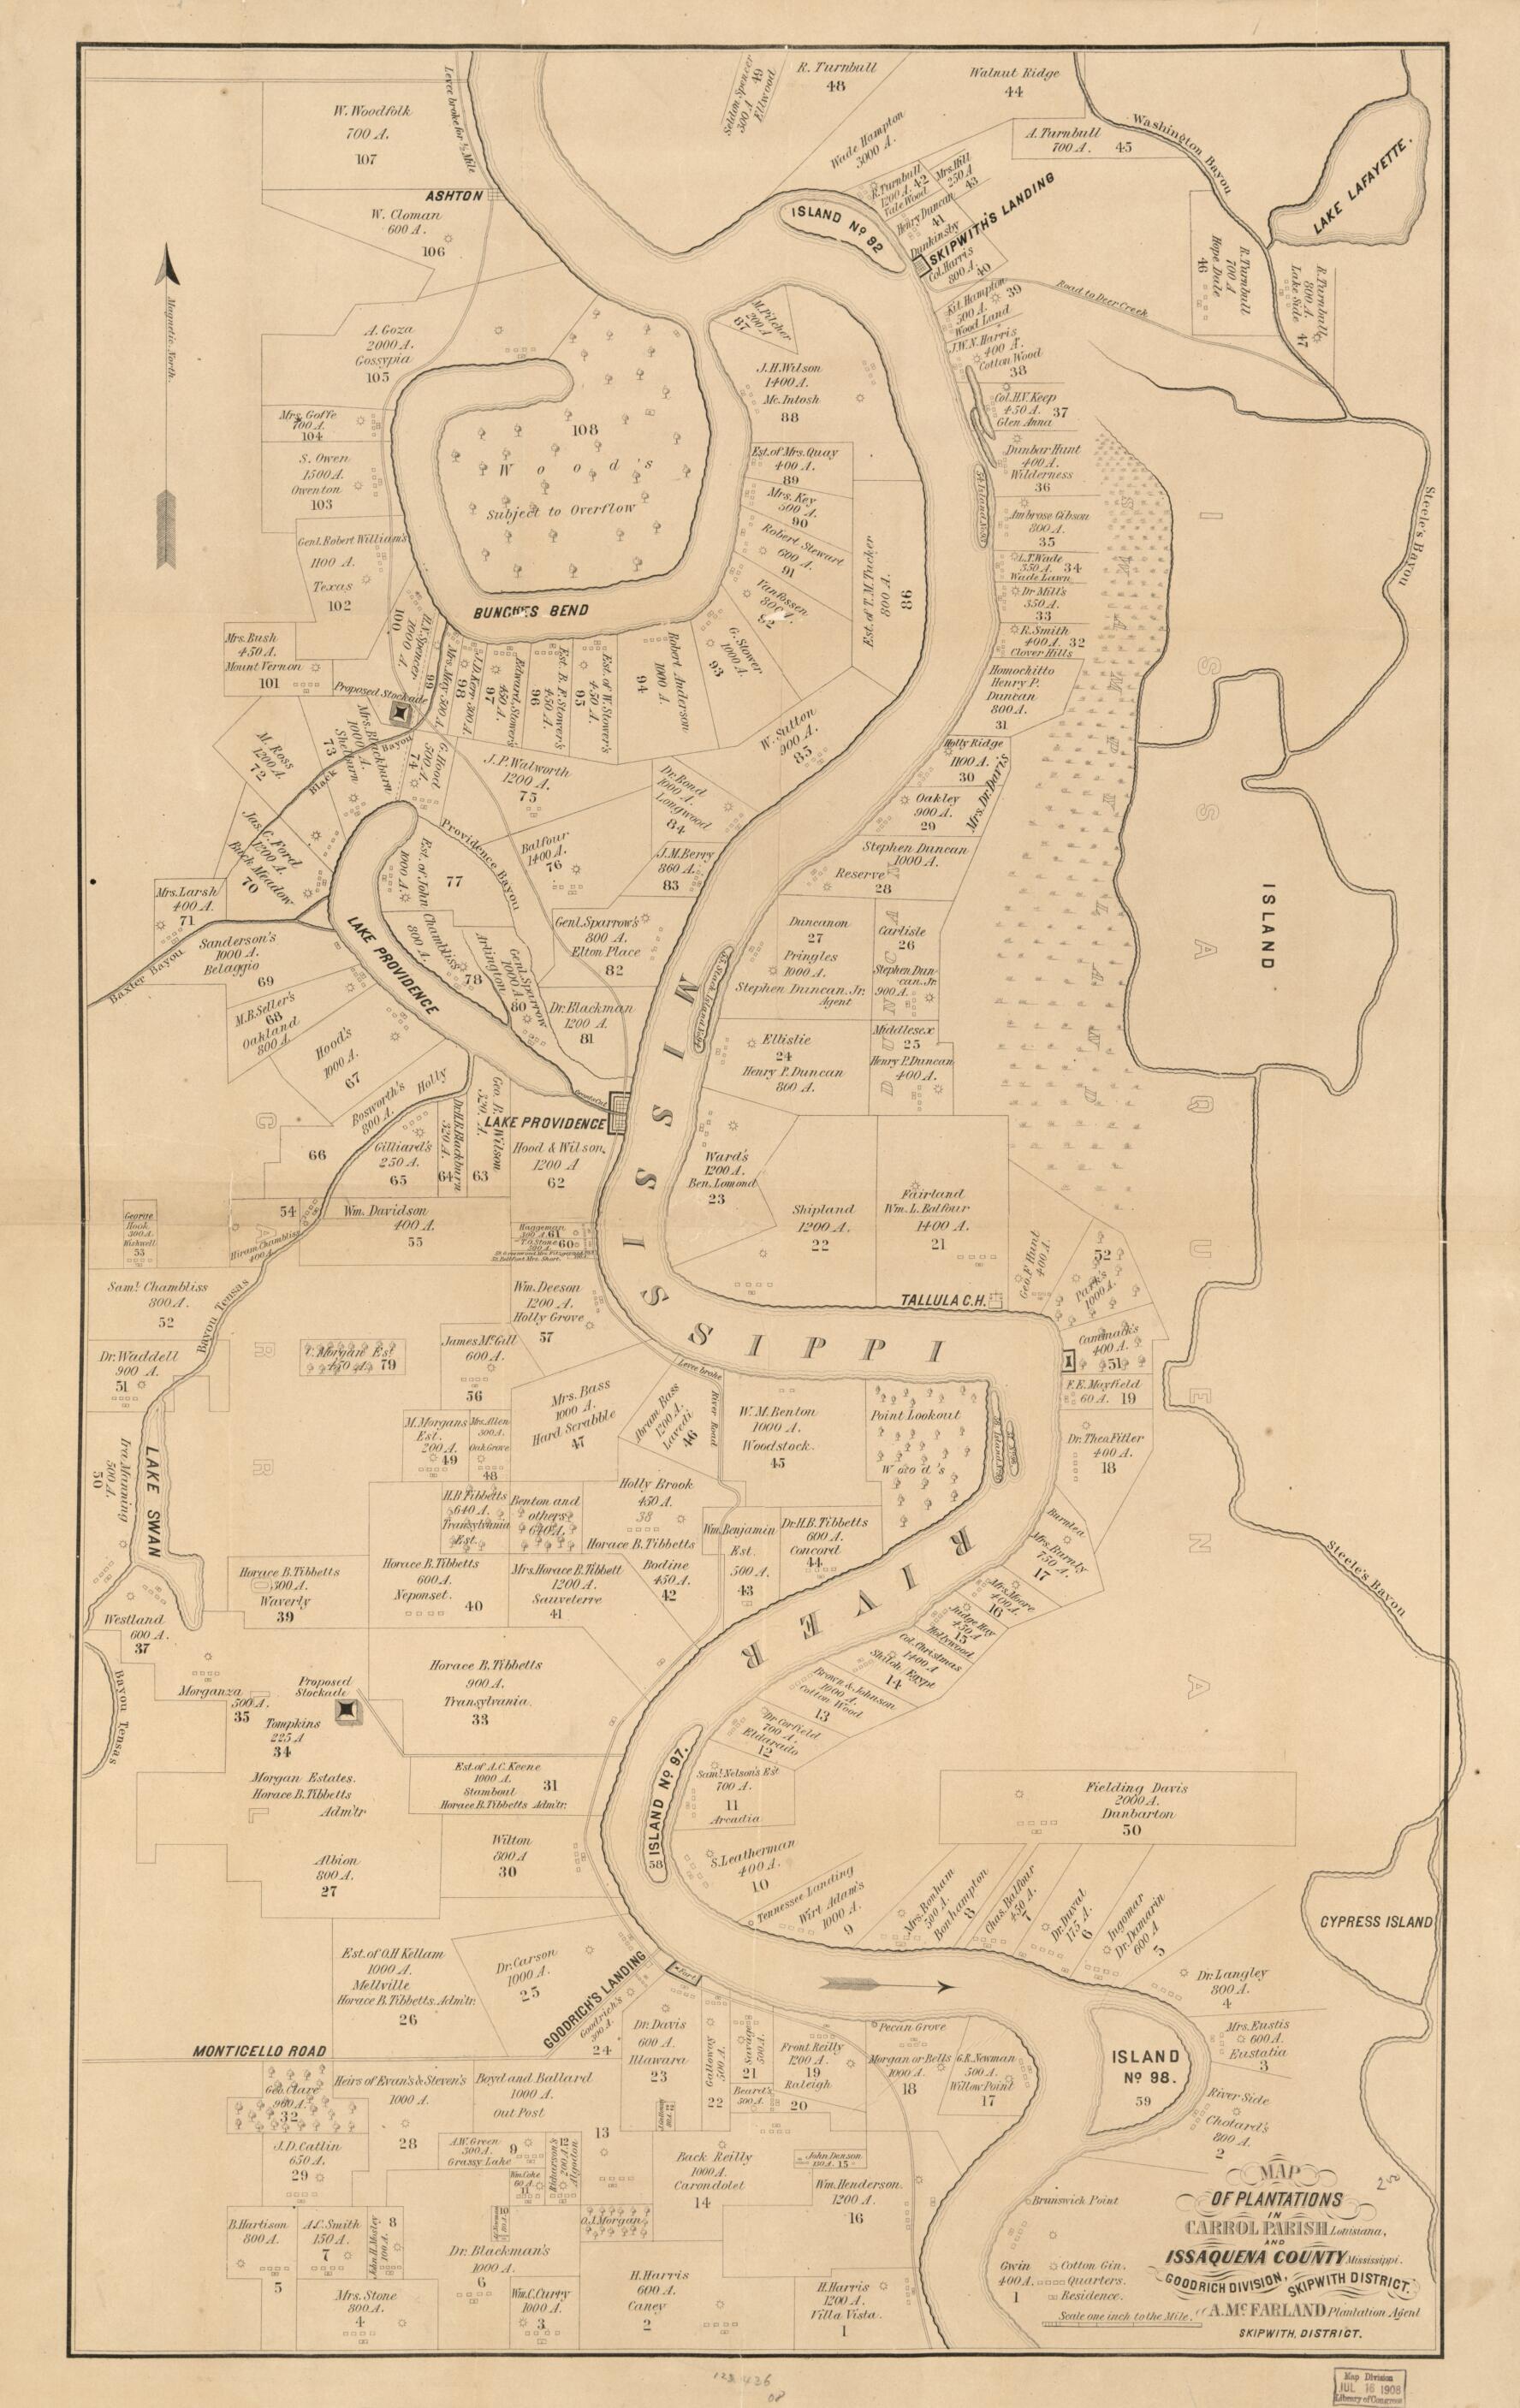 This old map of Map of Plantations In Carrol sic Parish, Louisiana and Issaquena County, Mississippi from 1860 was created by A. McFarland in 1860